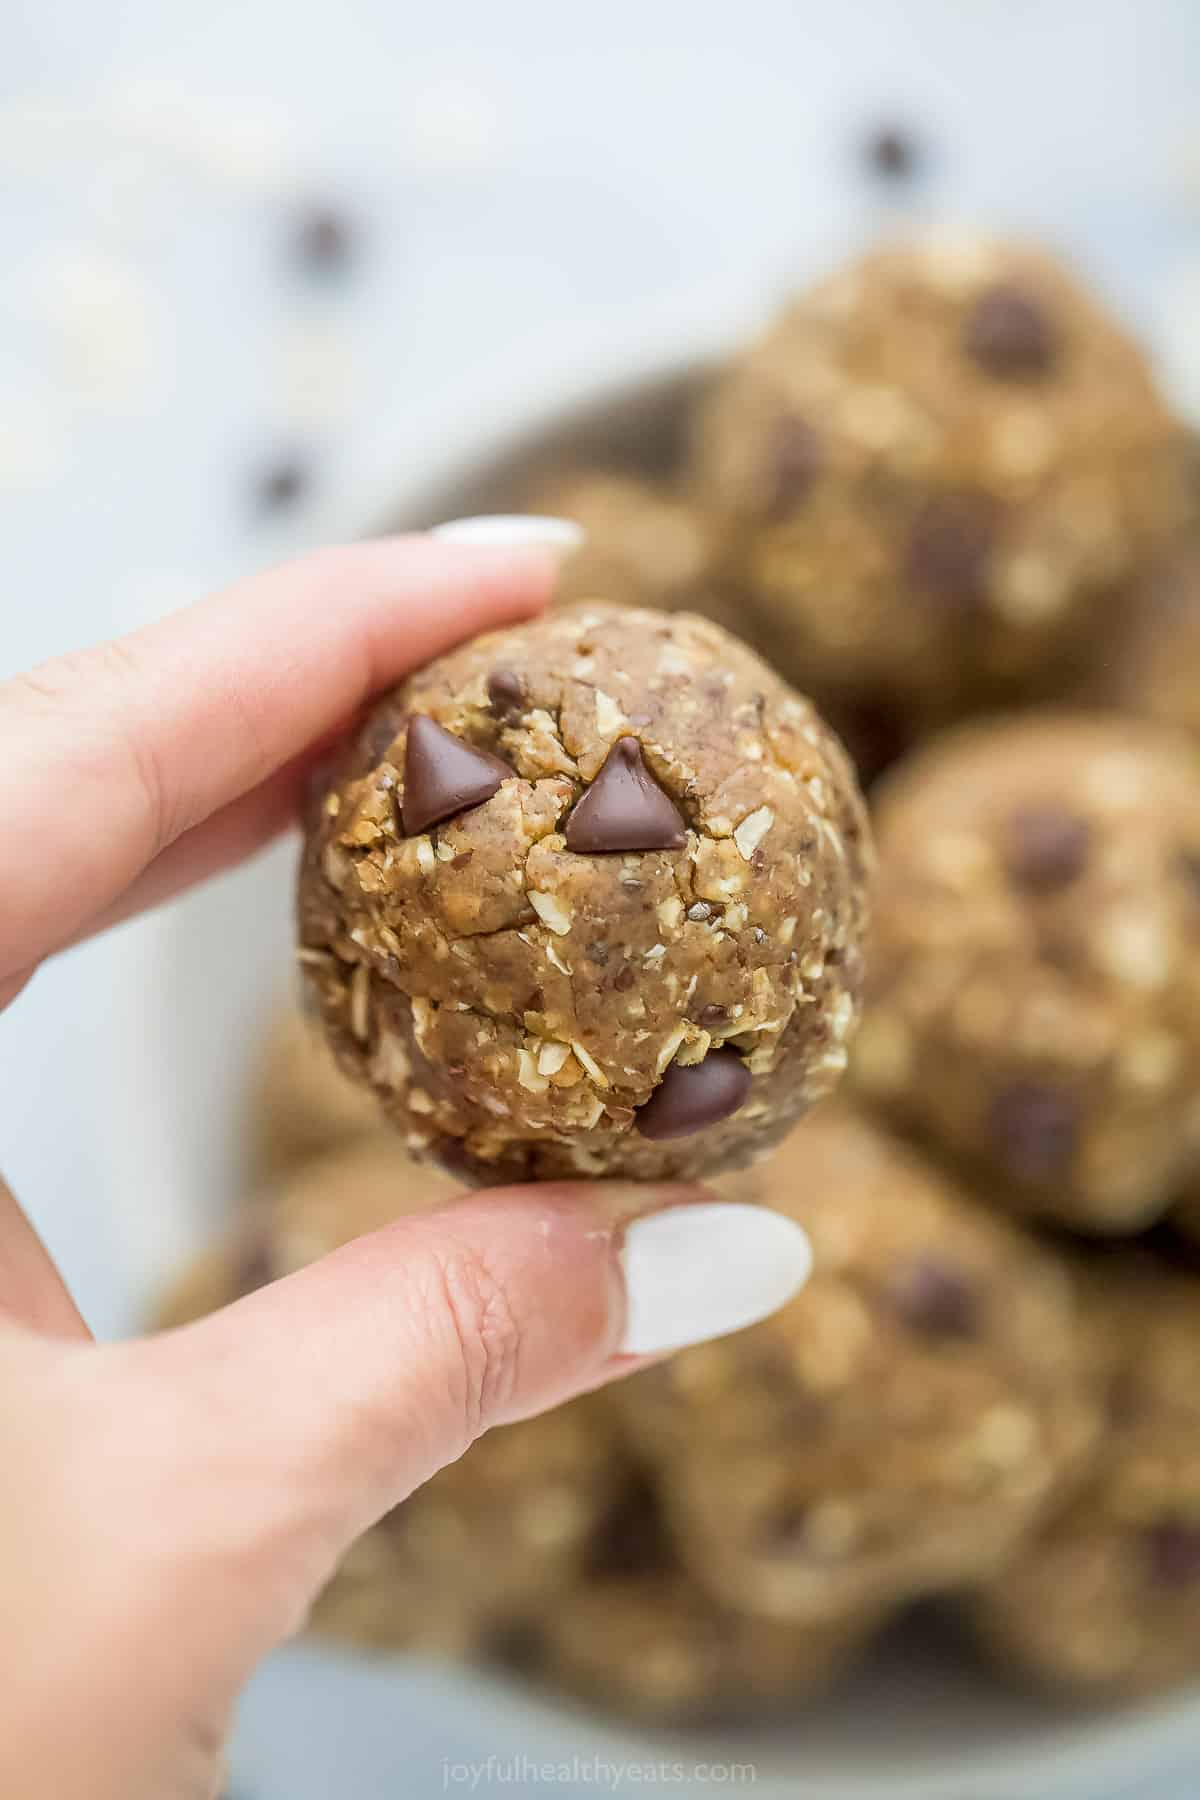 A peanut butter chocolate chip protein bite being held above a bowl full of additional energy balls